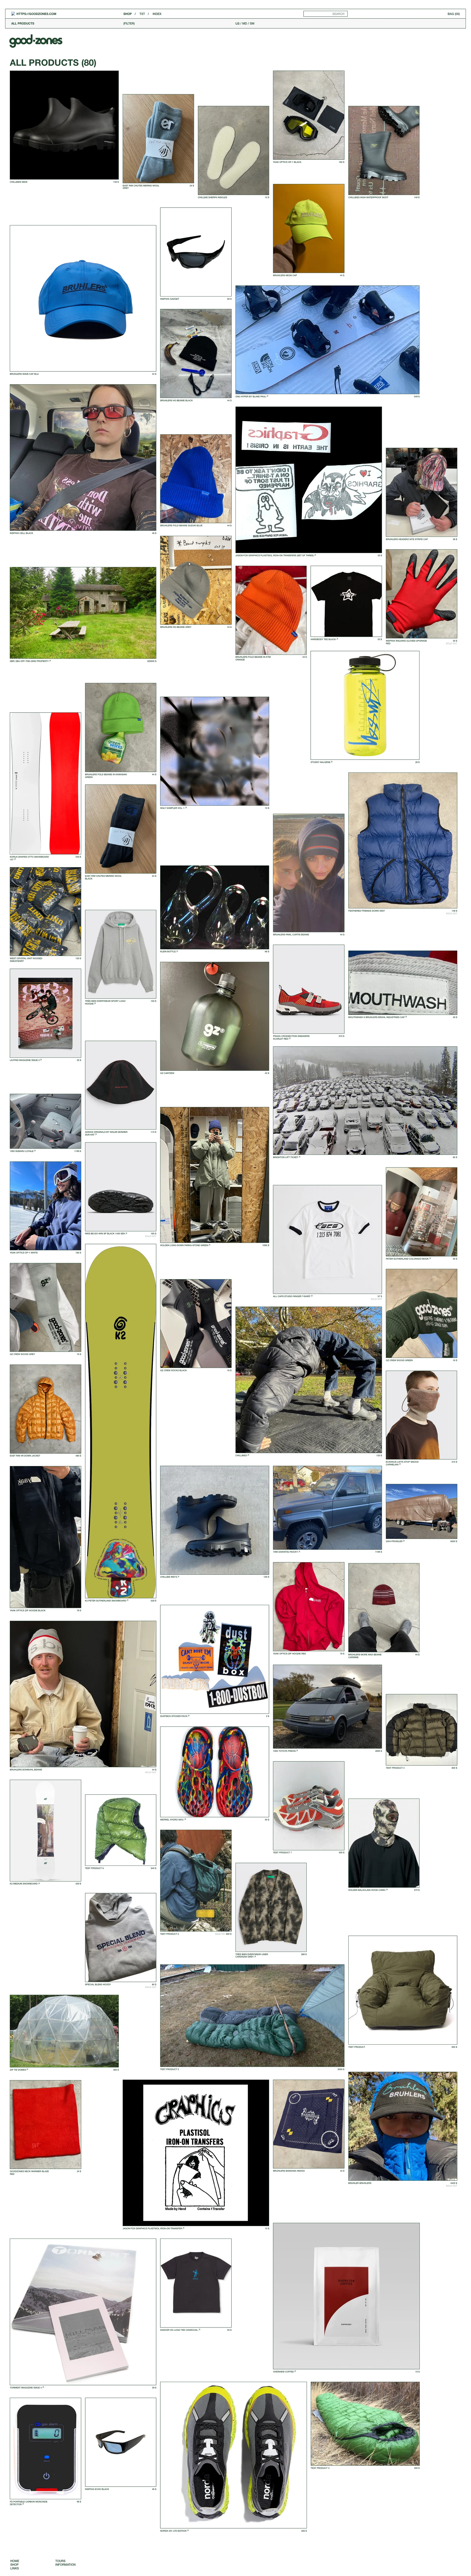 Good Zones Landing Page Example: With a product mix ranging from your every day beanie, to an off-grid 5br property, Good Zones is anything but expected.